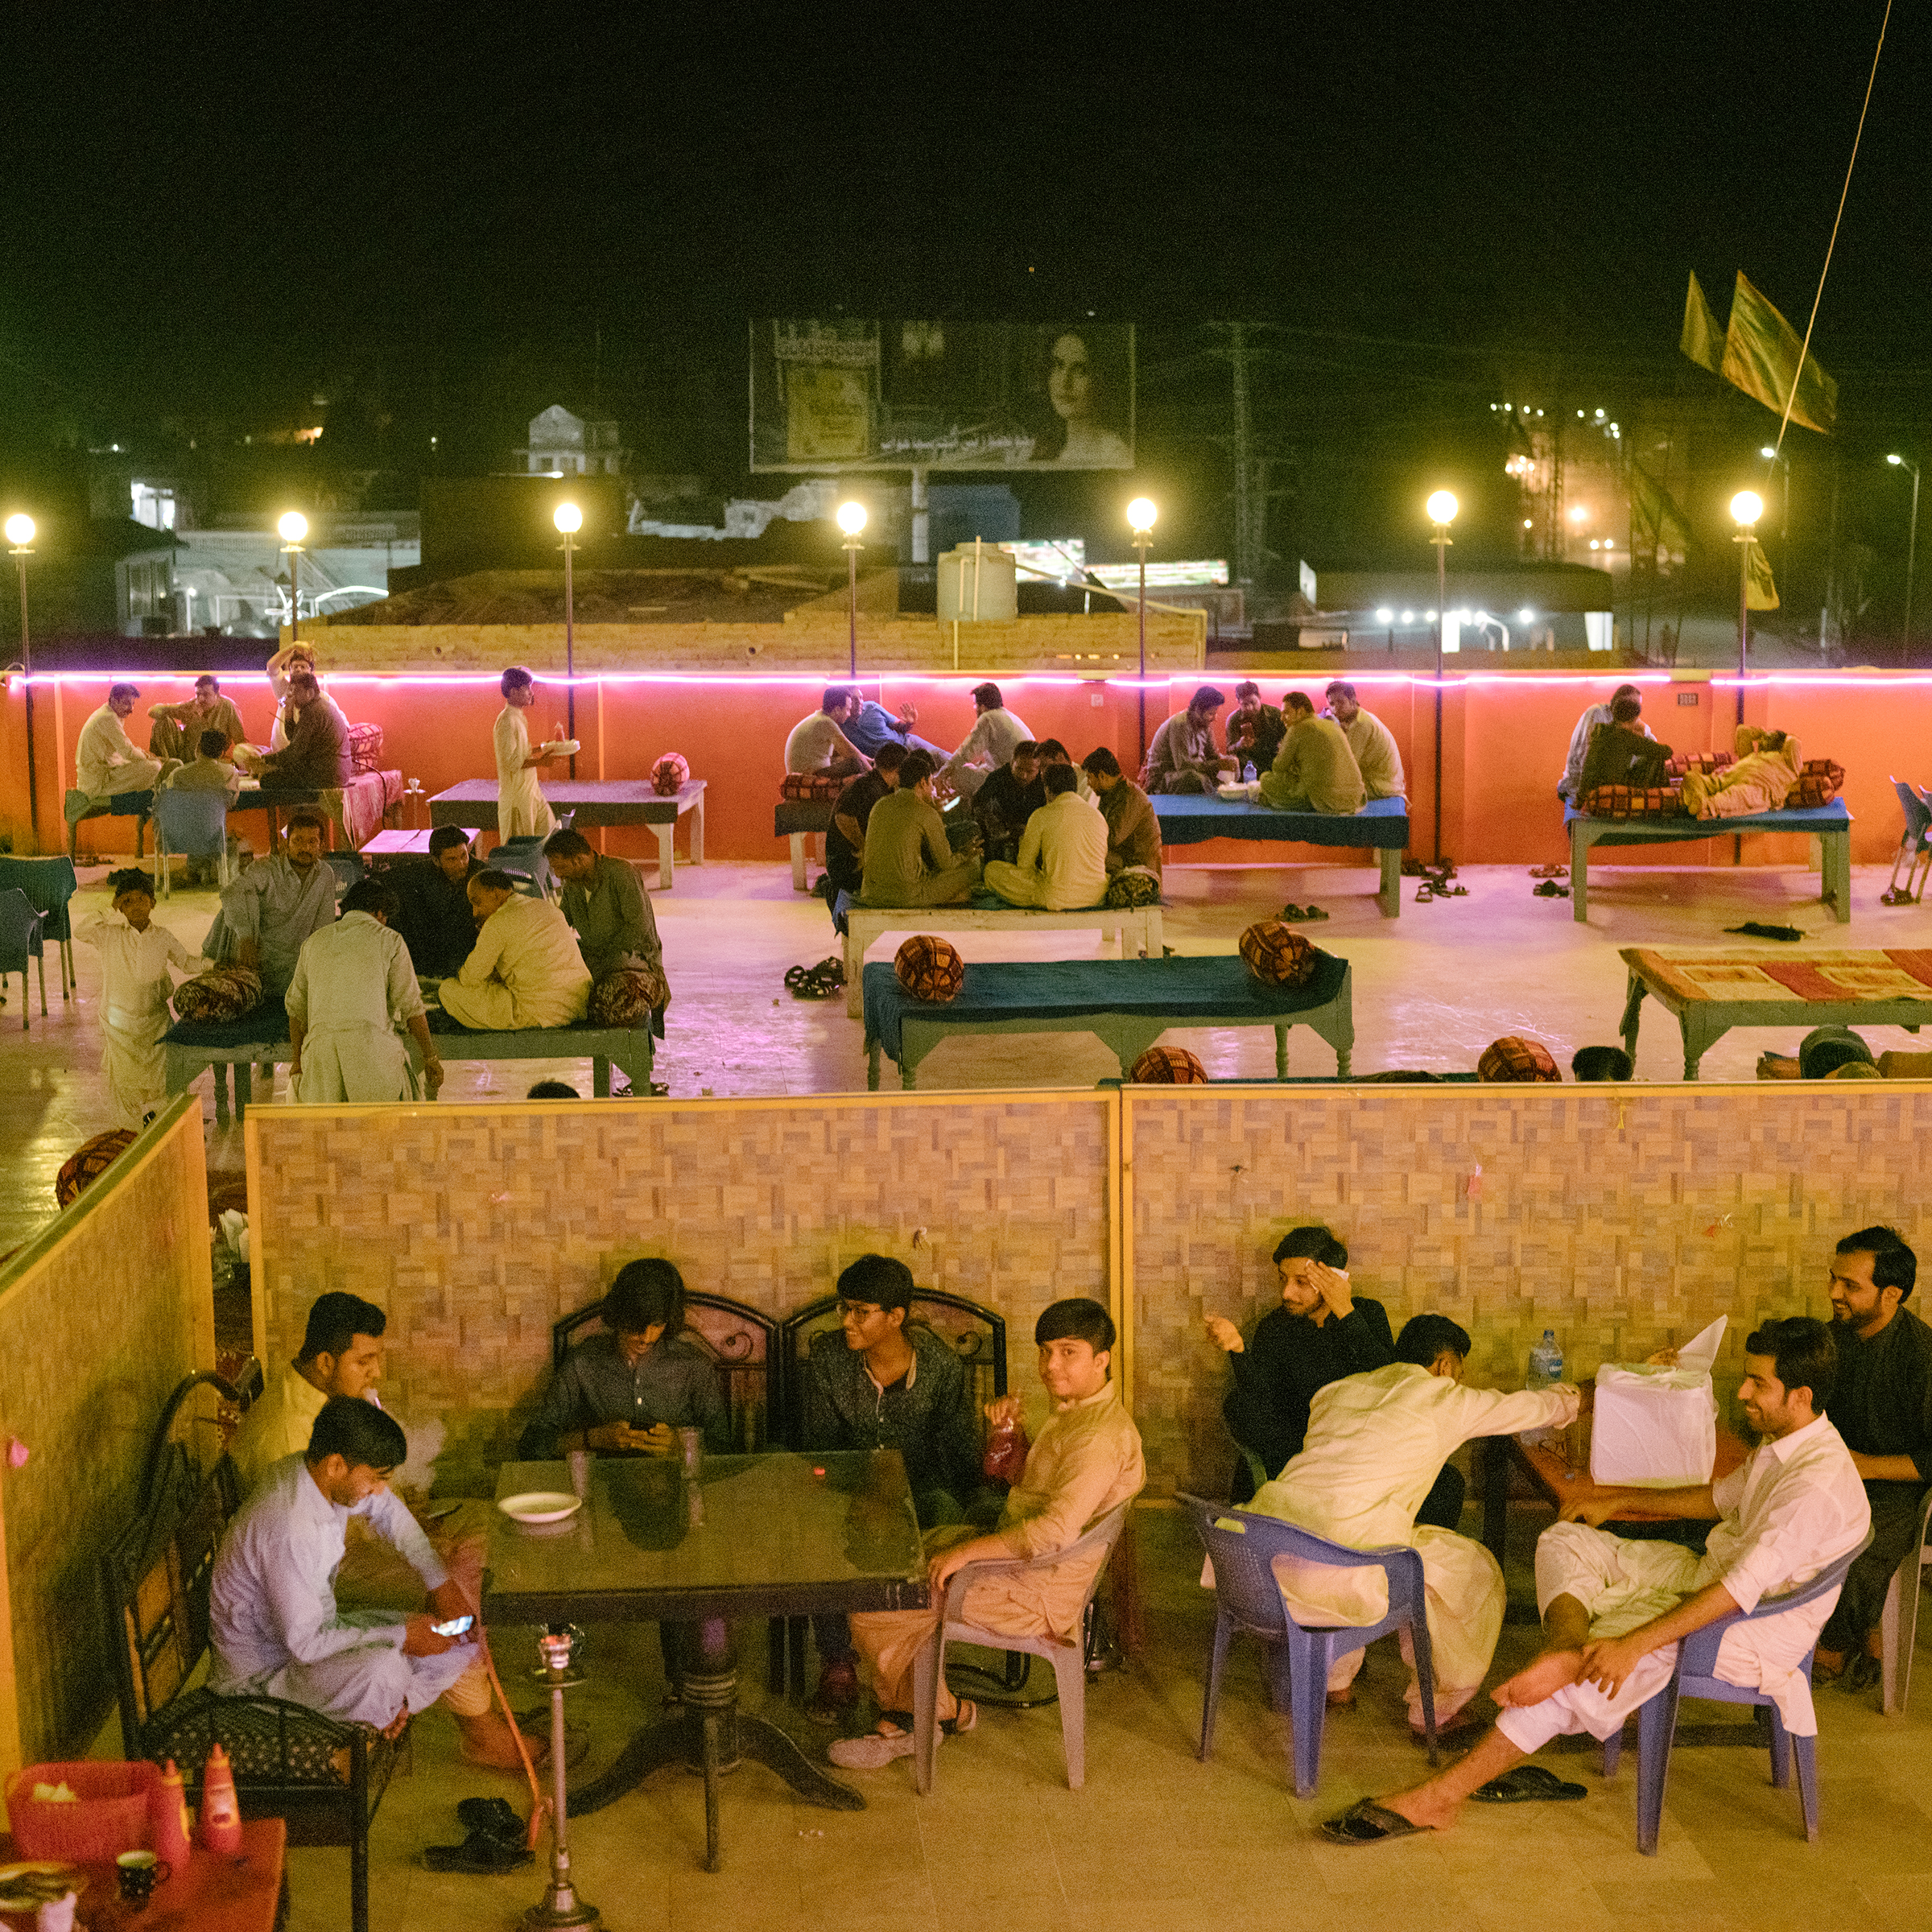 Outdoor restaurants, like this one in Jacobabad on June 27, are only open after sunset. Patrons may stay late into the night. (Matthieu Paley for TIME)